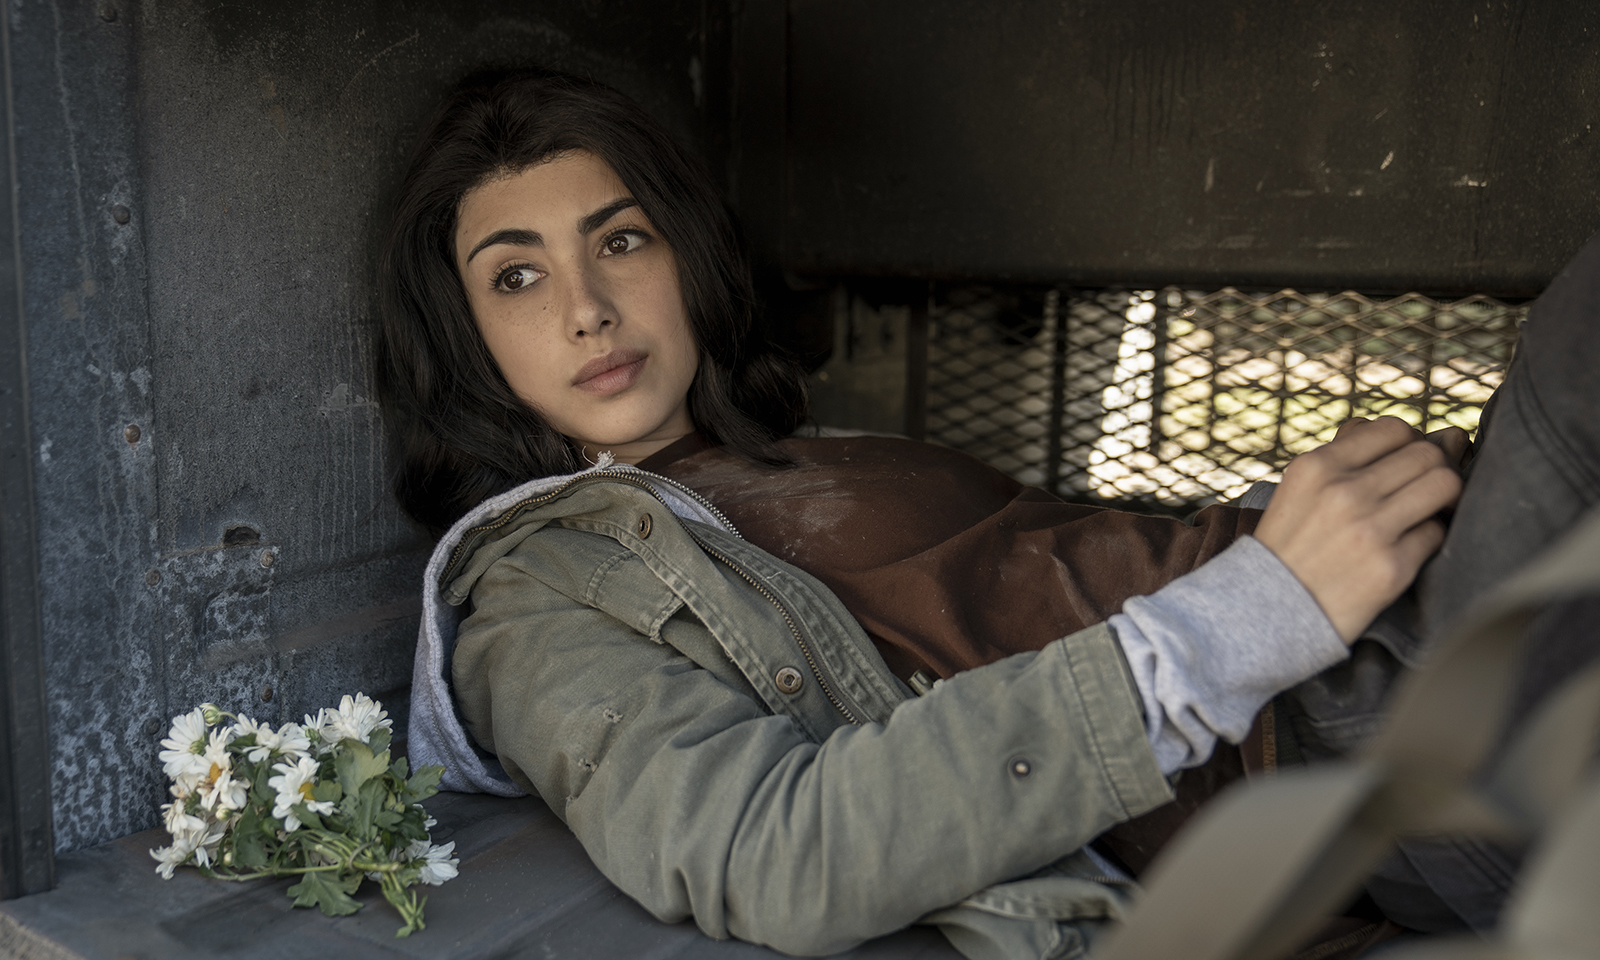 The Walking Dead: World Beyond Star Alexa Mansour Shares If She Would Return On A Future Series [Exclusive Interview]